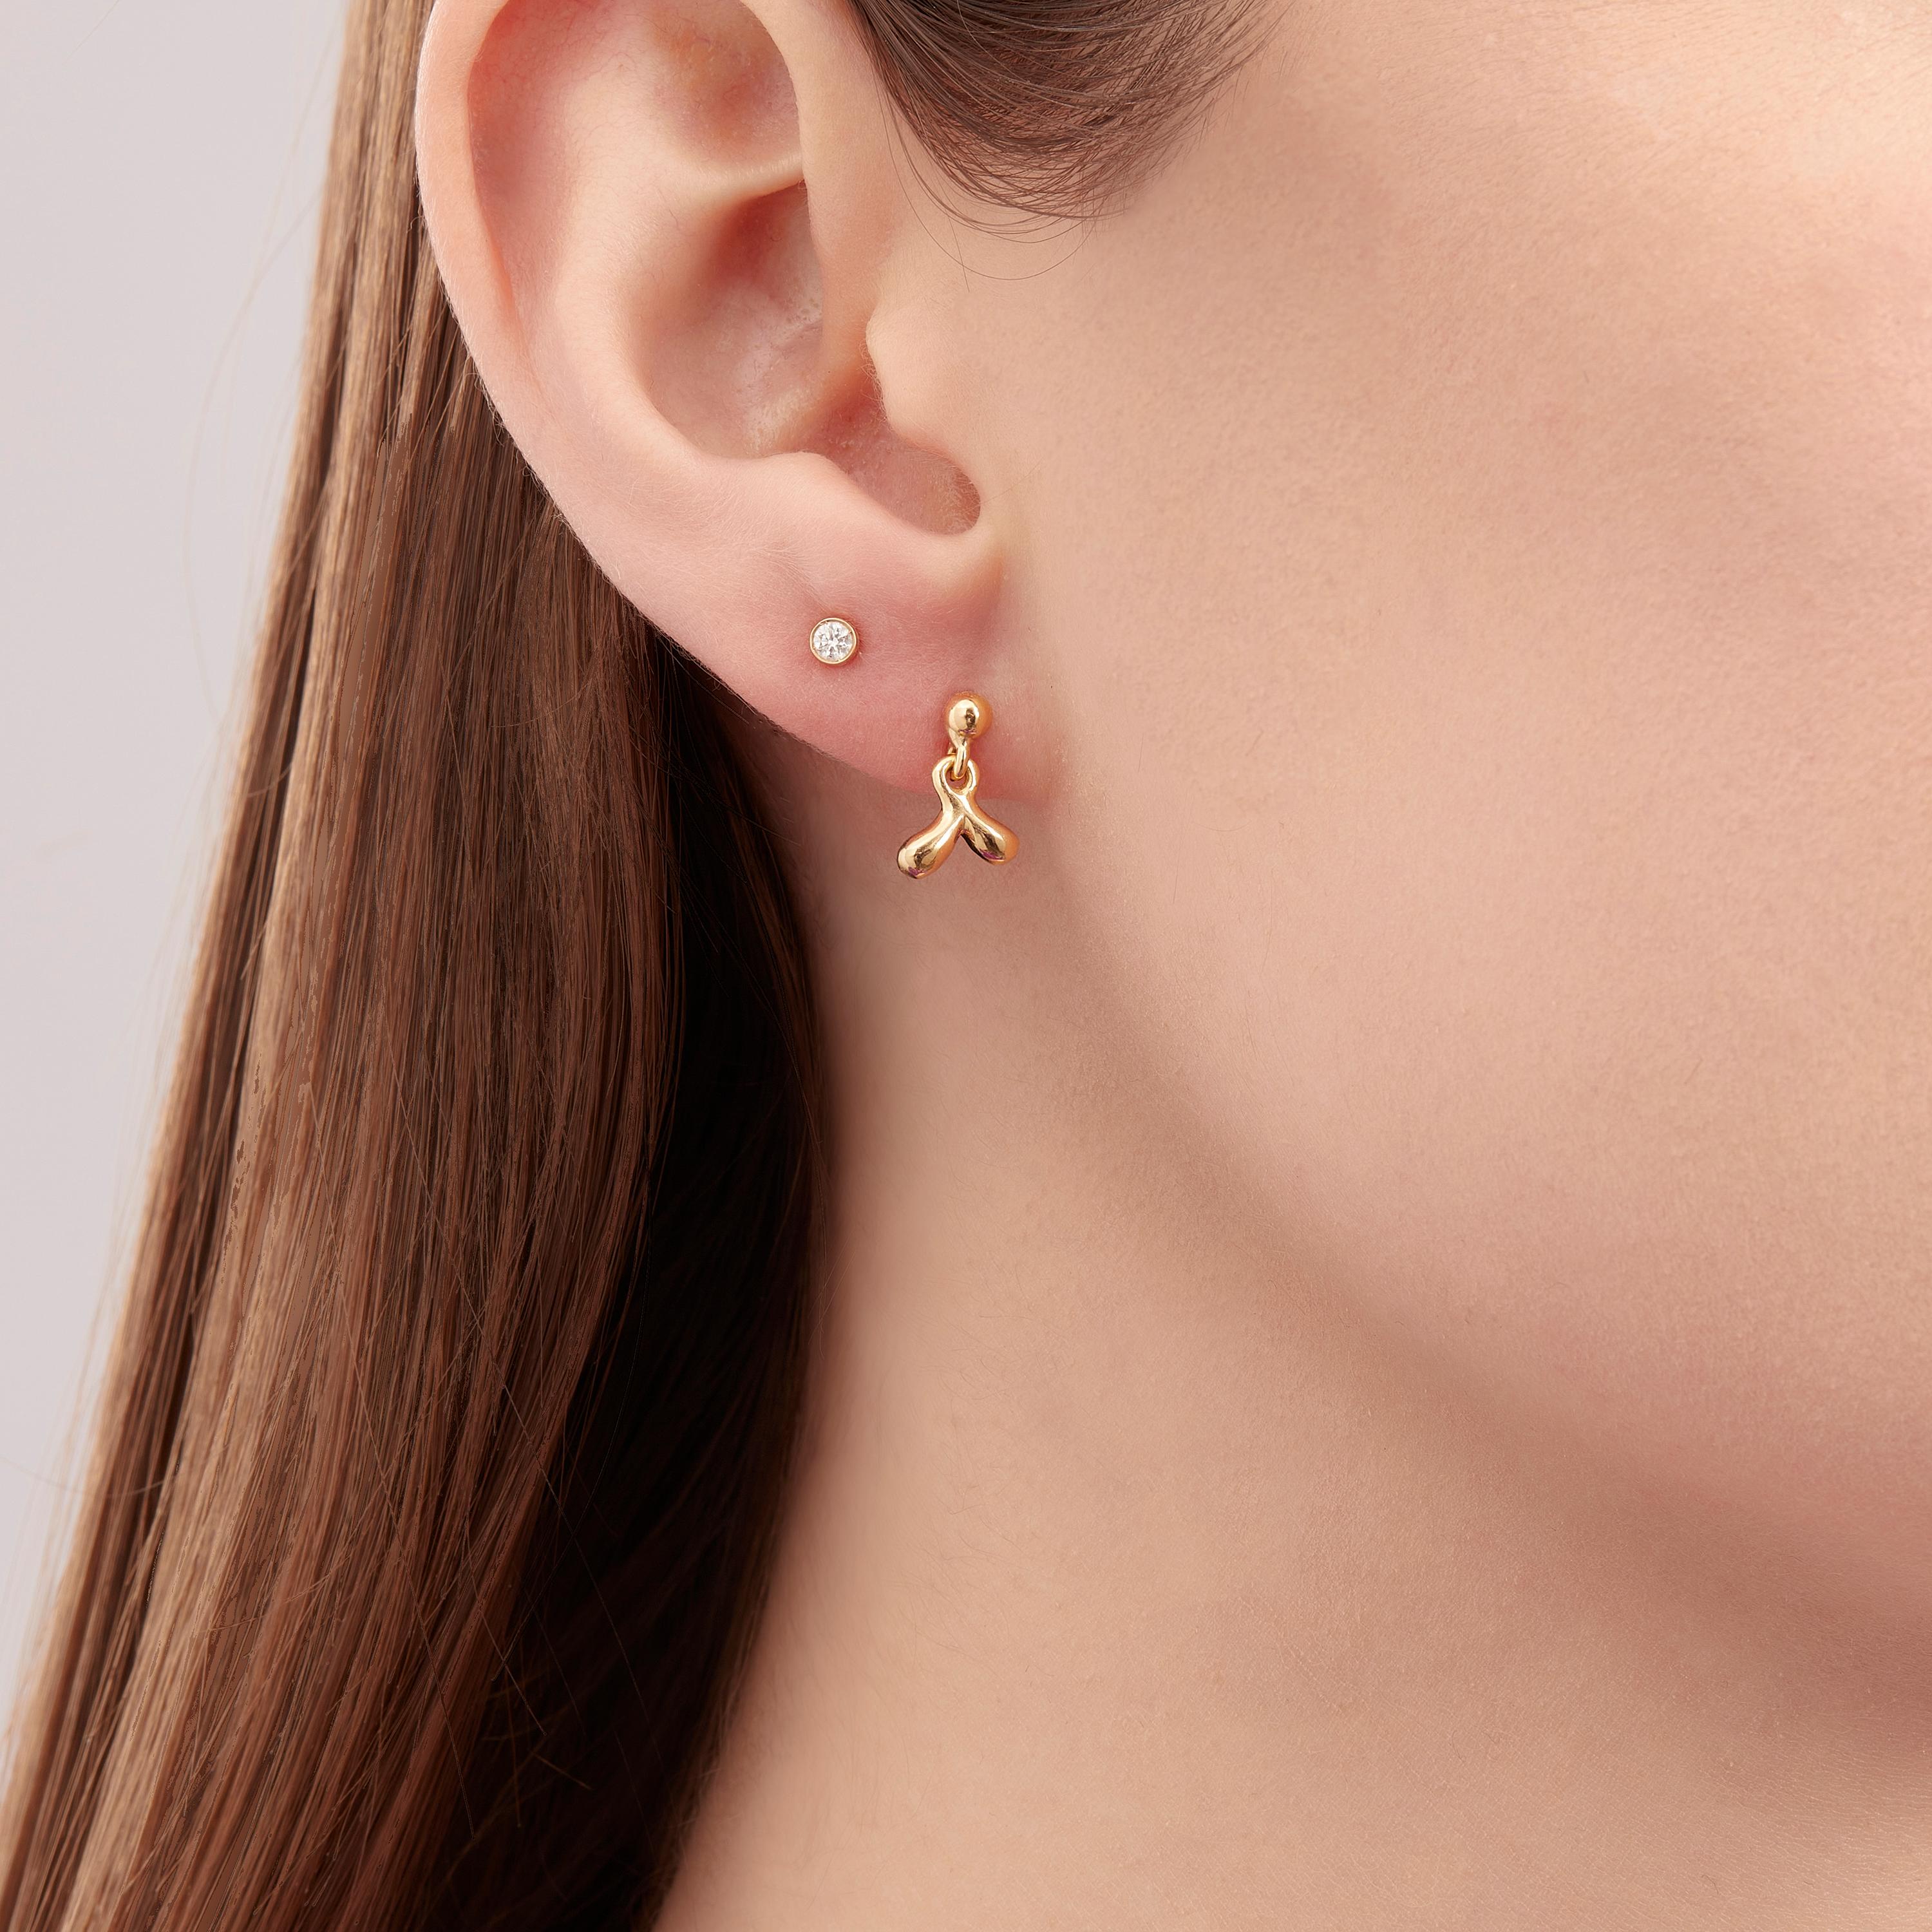 Springing forth from a lush magical wilderness are the JungleRemix Small Earrings with their clusters of gold leaves with well-rounded tips jingling and jangling to mimic the swaying movements of exotic flora in the heart of the rainforest. Cast as